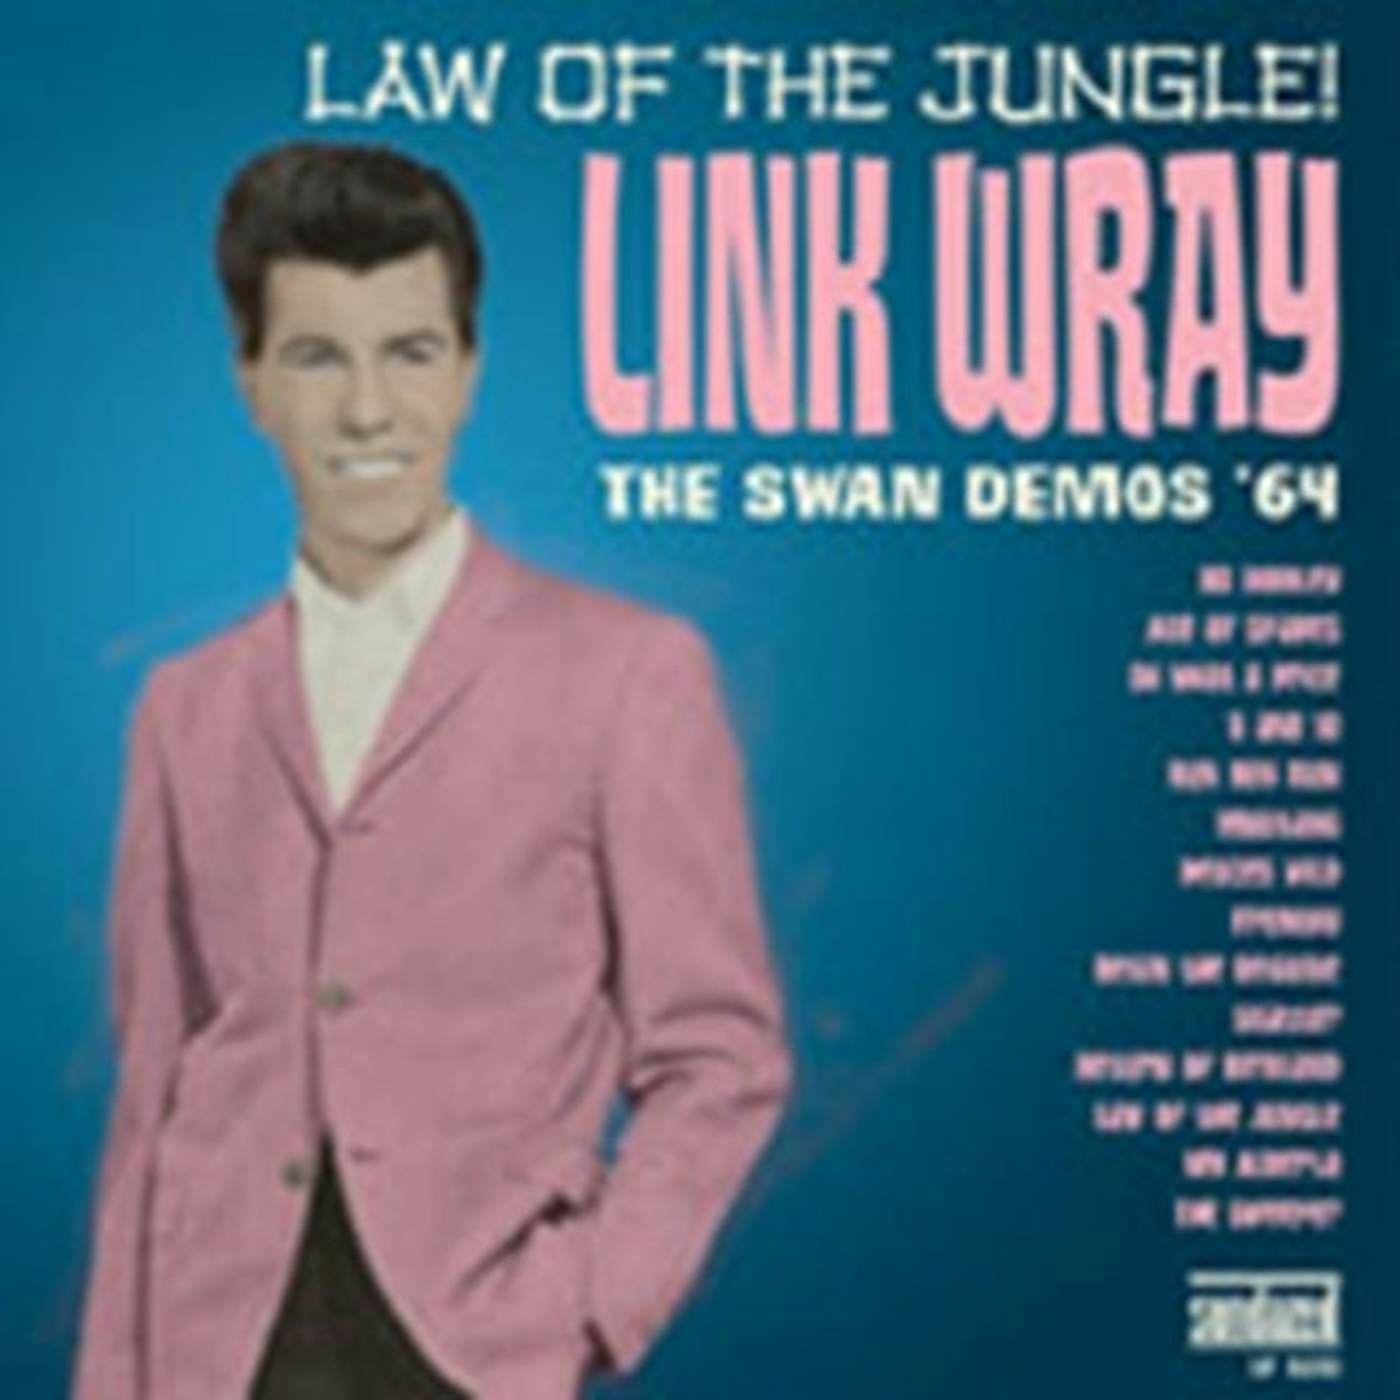 Link Wray CD - Law Of The Jungle